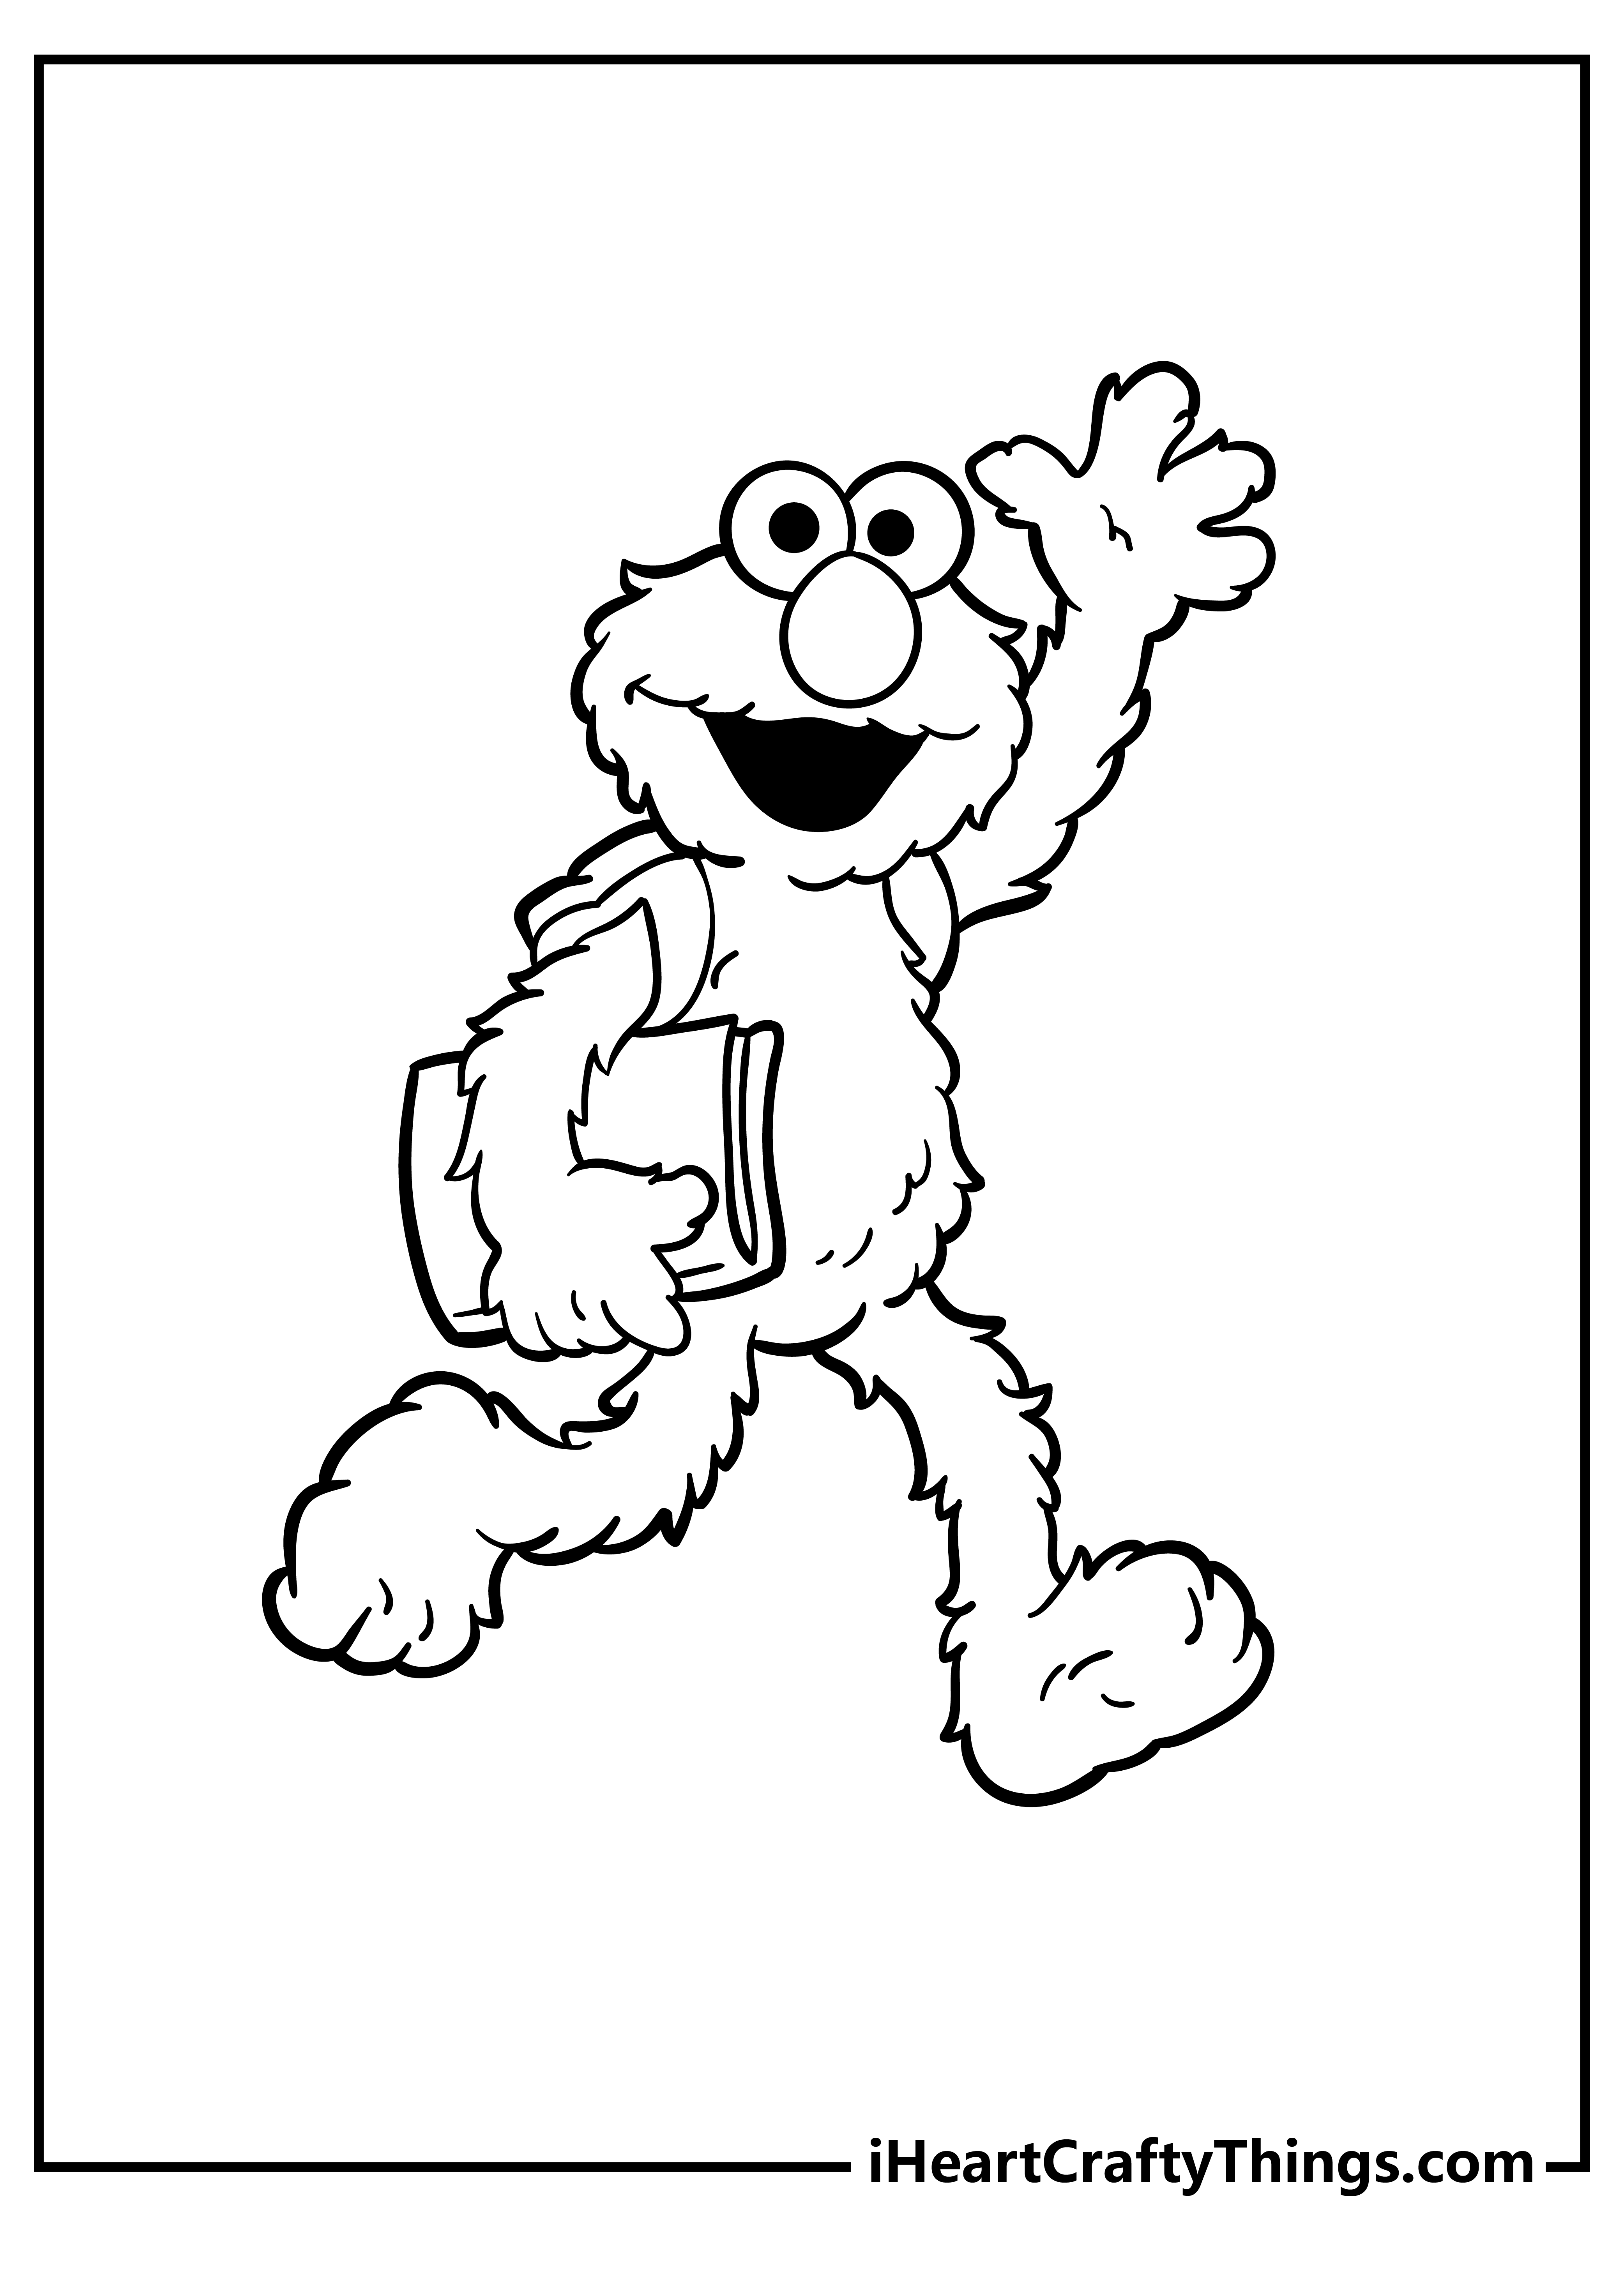 Elmo Coloring Pages for preschoolers free printable